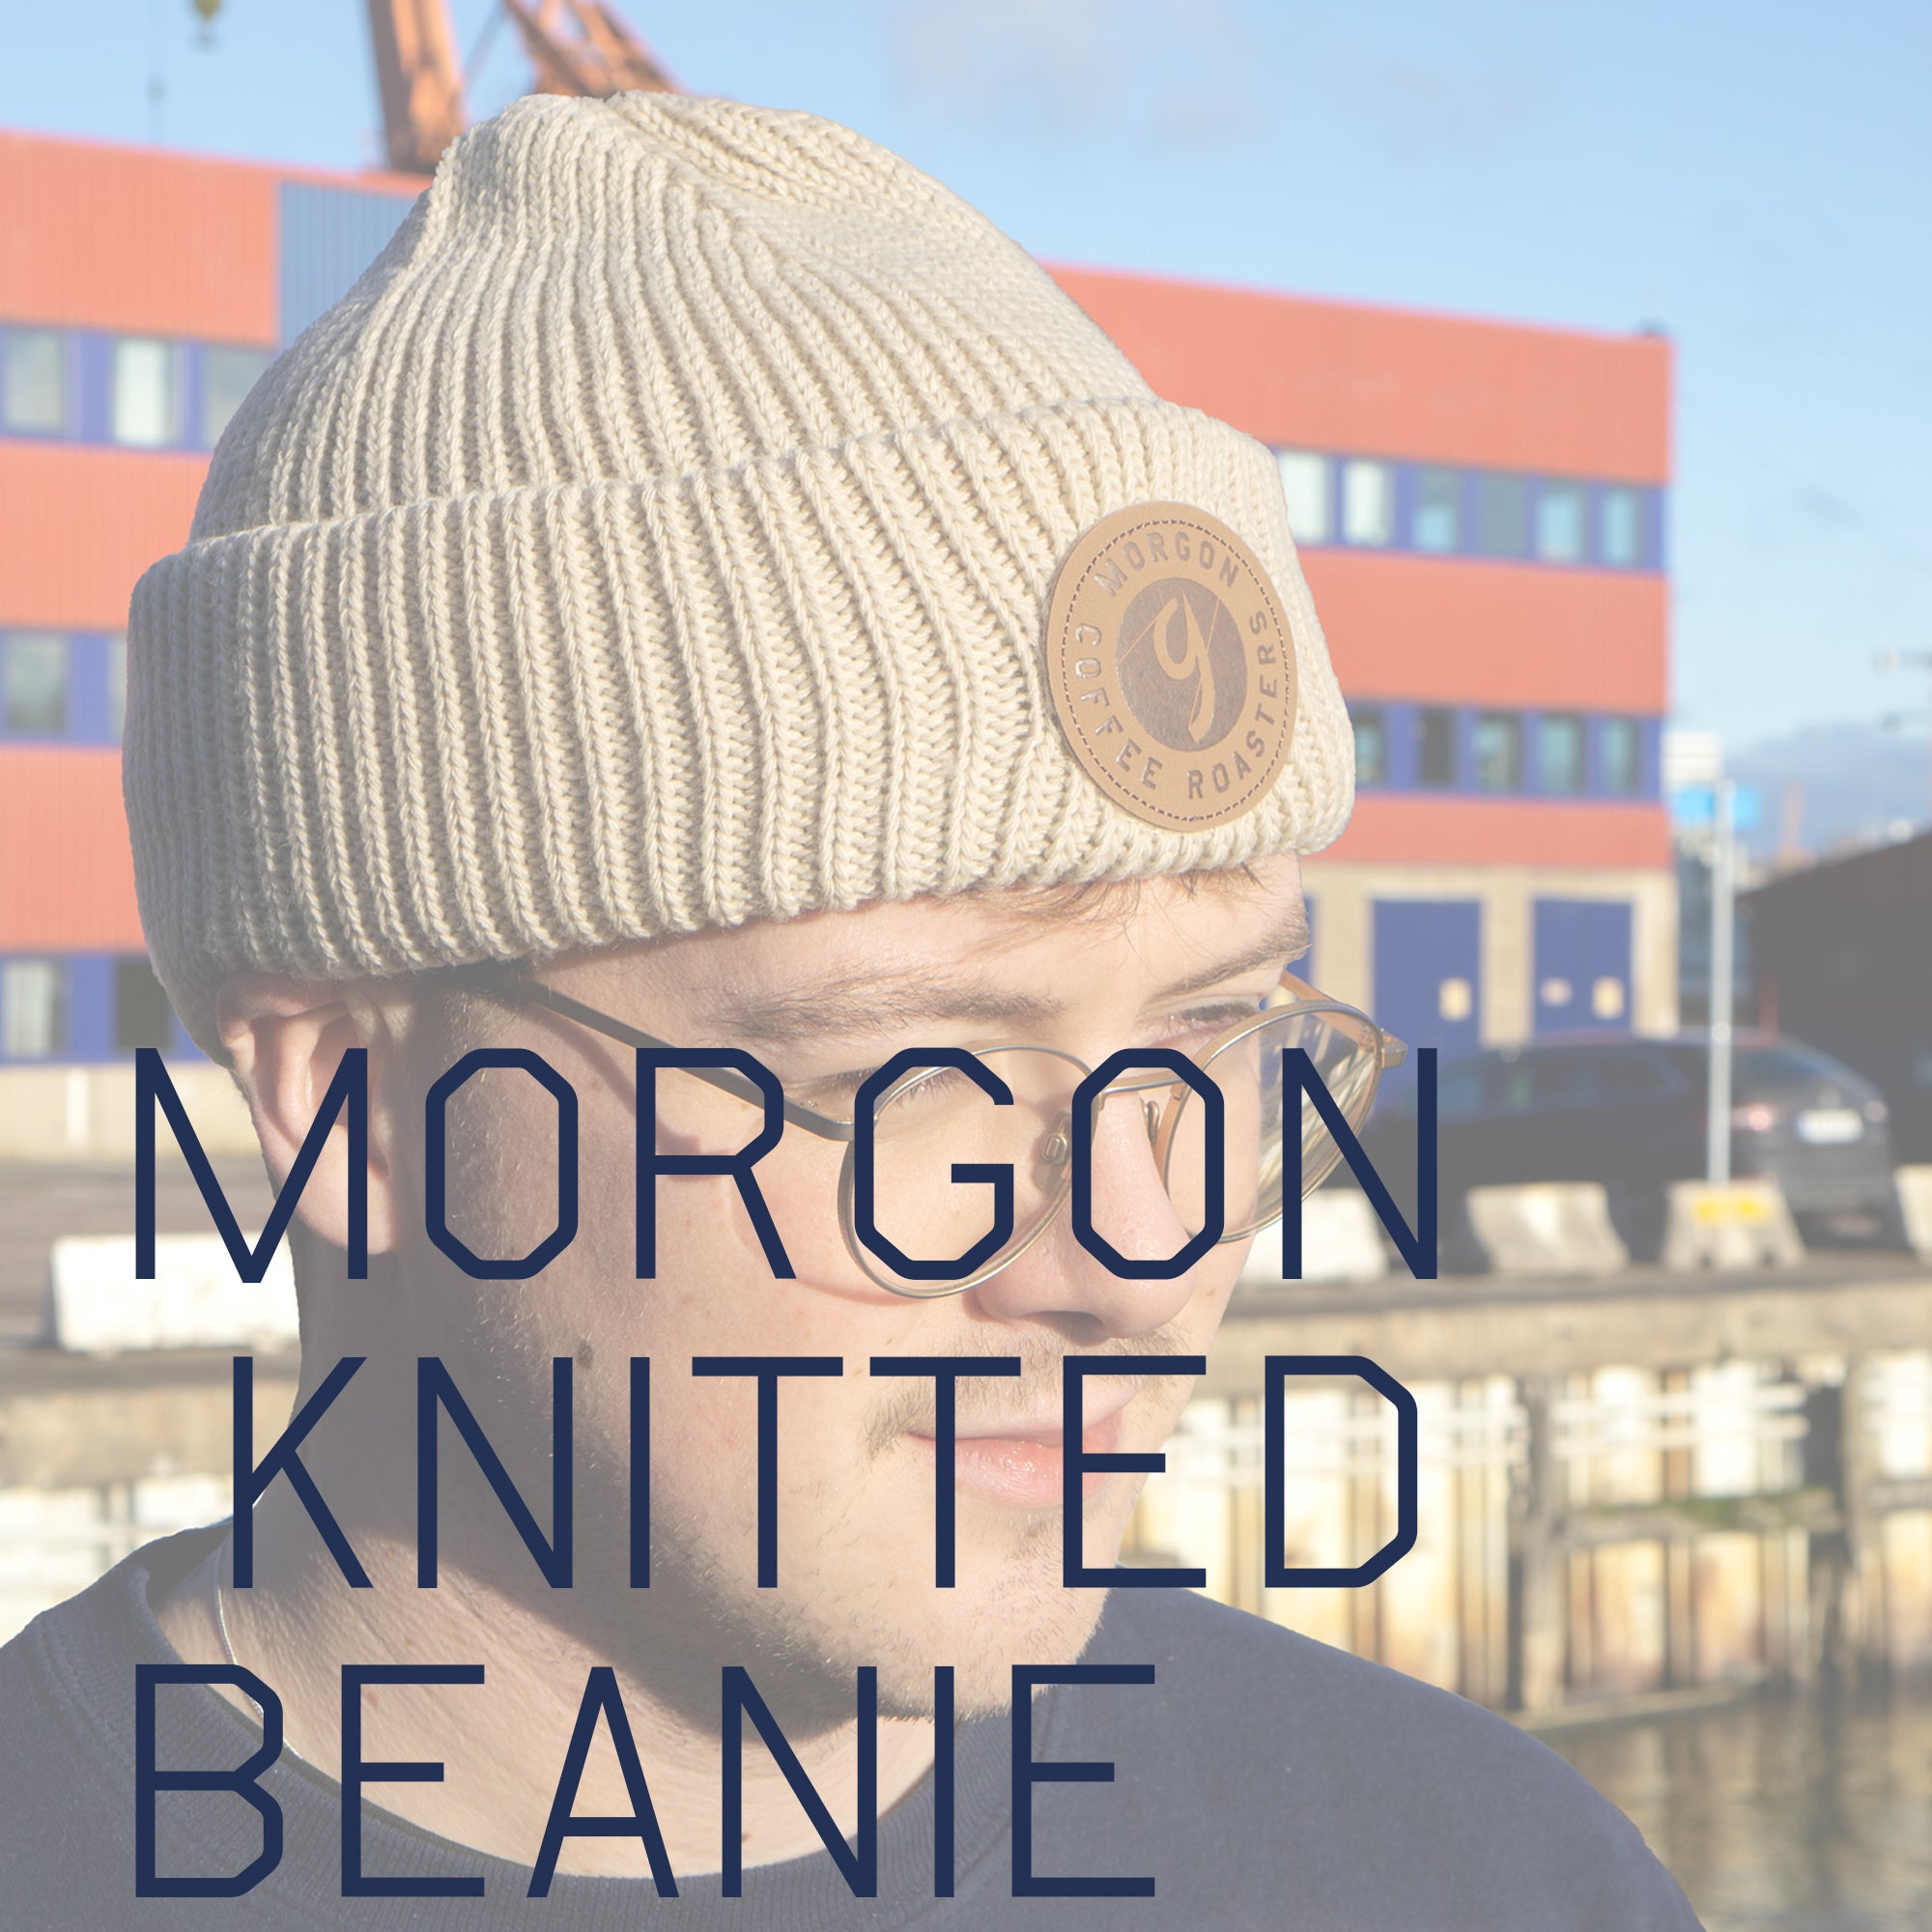 Morgon Knitted Beanie